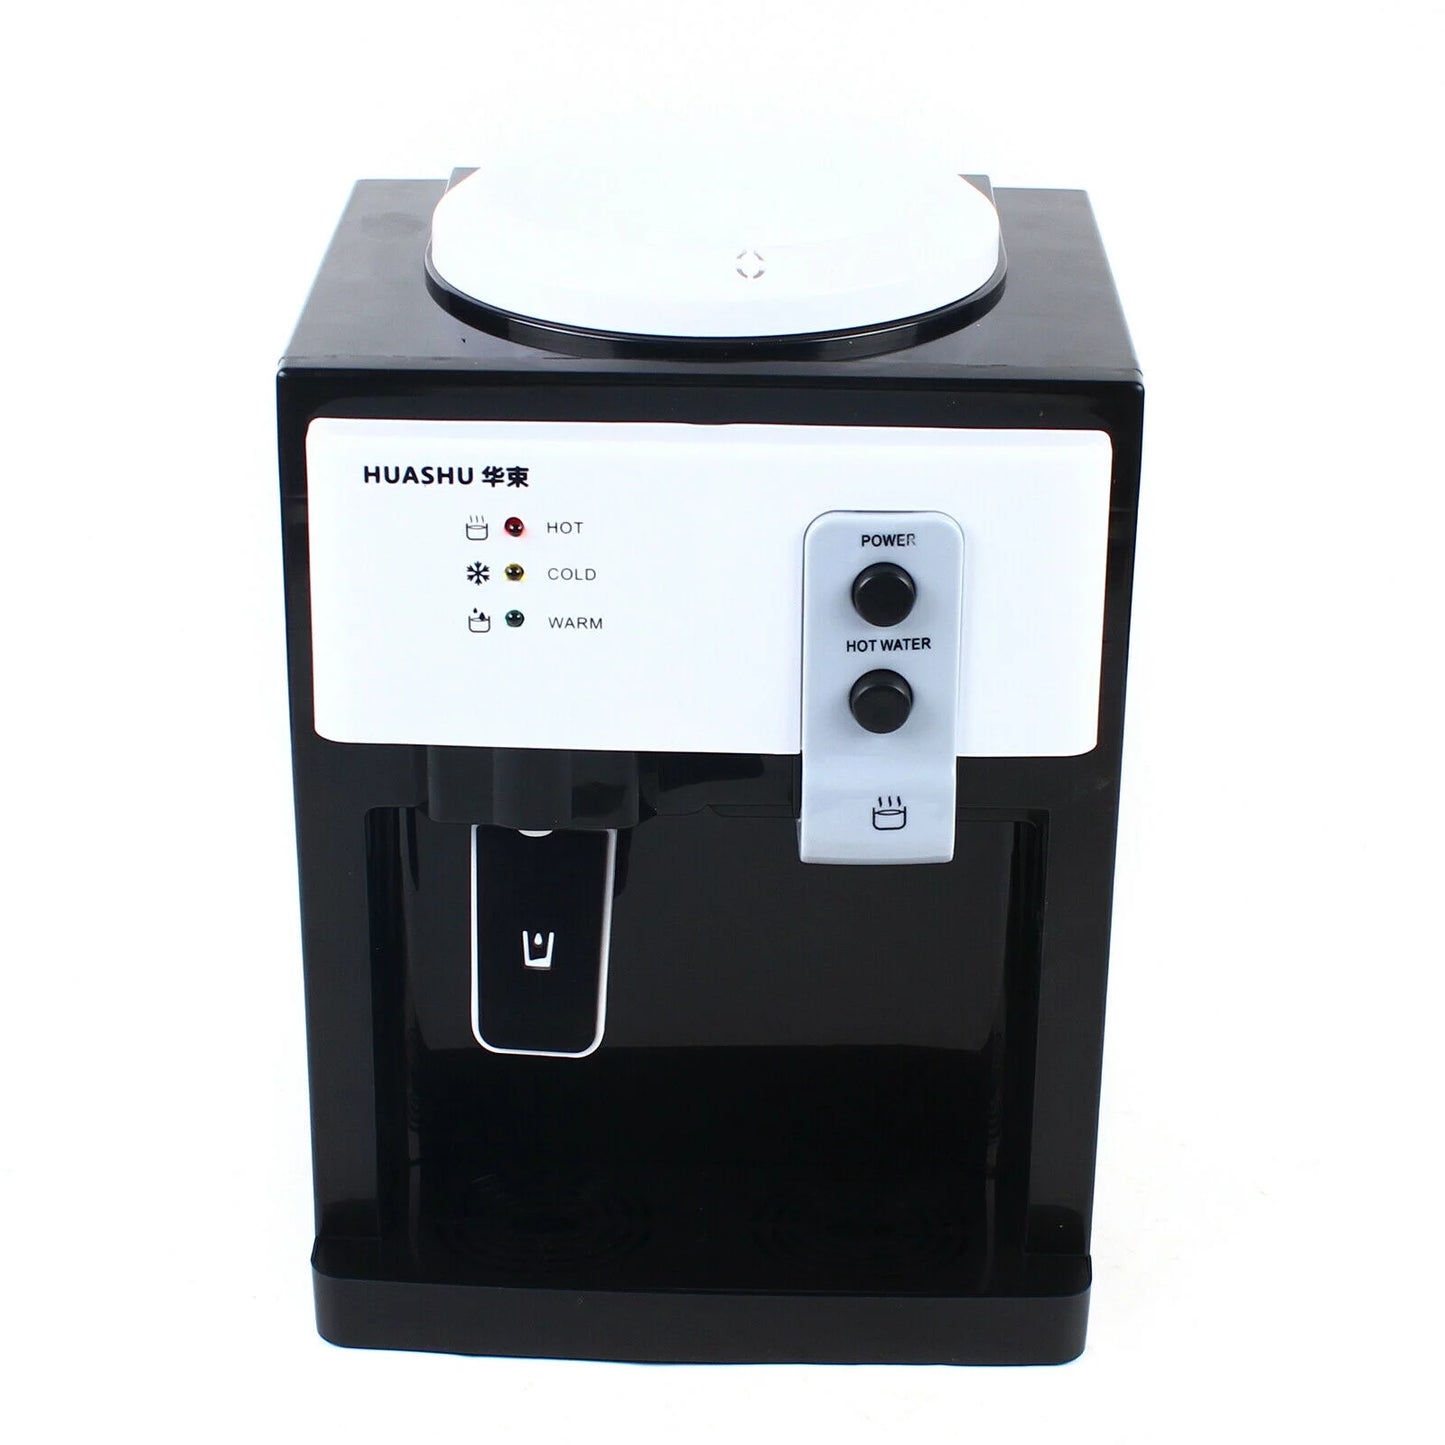 ZhdnBhnos 5 Gallon Countertop Electric Hot & Cold Water Cooler Dispenser Top Loading Drinking Machine For Home Office